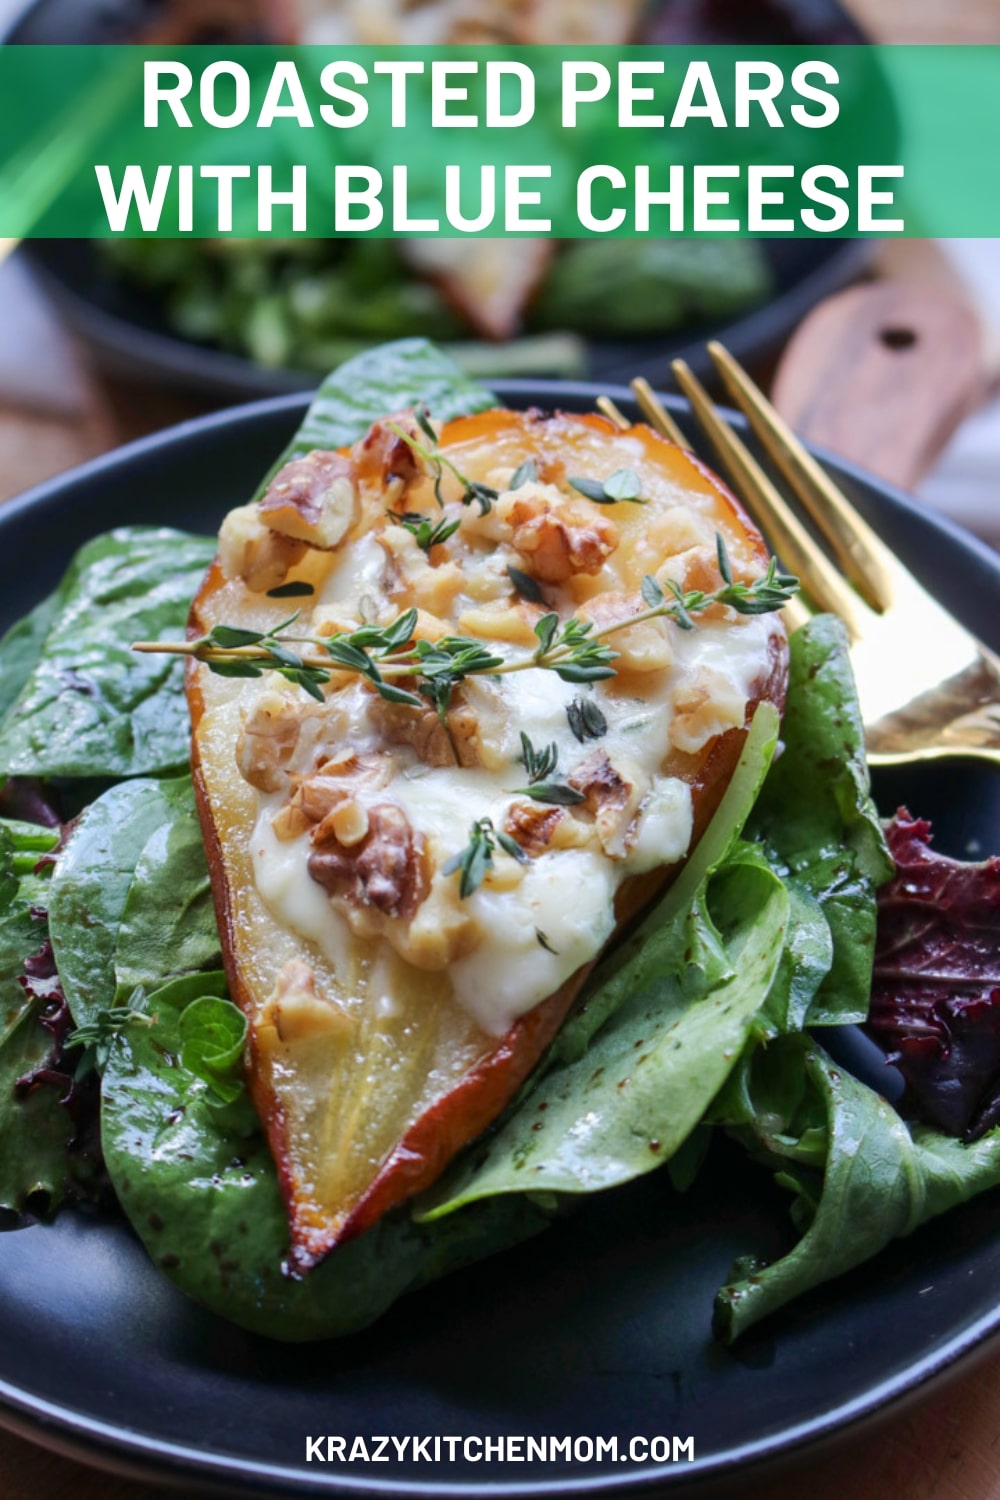 Tender juicy pears drizzled with olive oil and baked until soft. Stuffed with blue cheese and walnuts and served on a bed of greens. via @krazykitchenmom